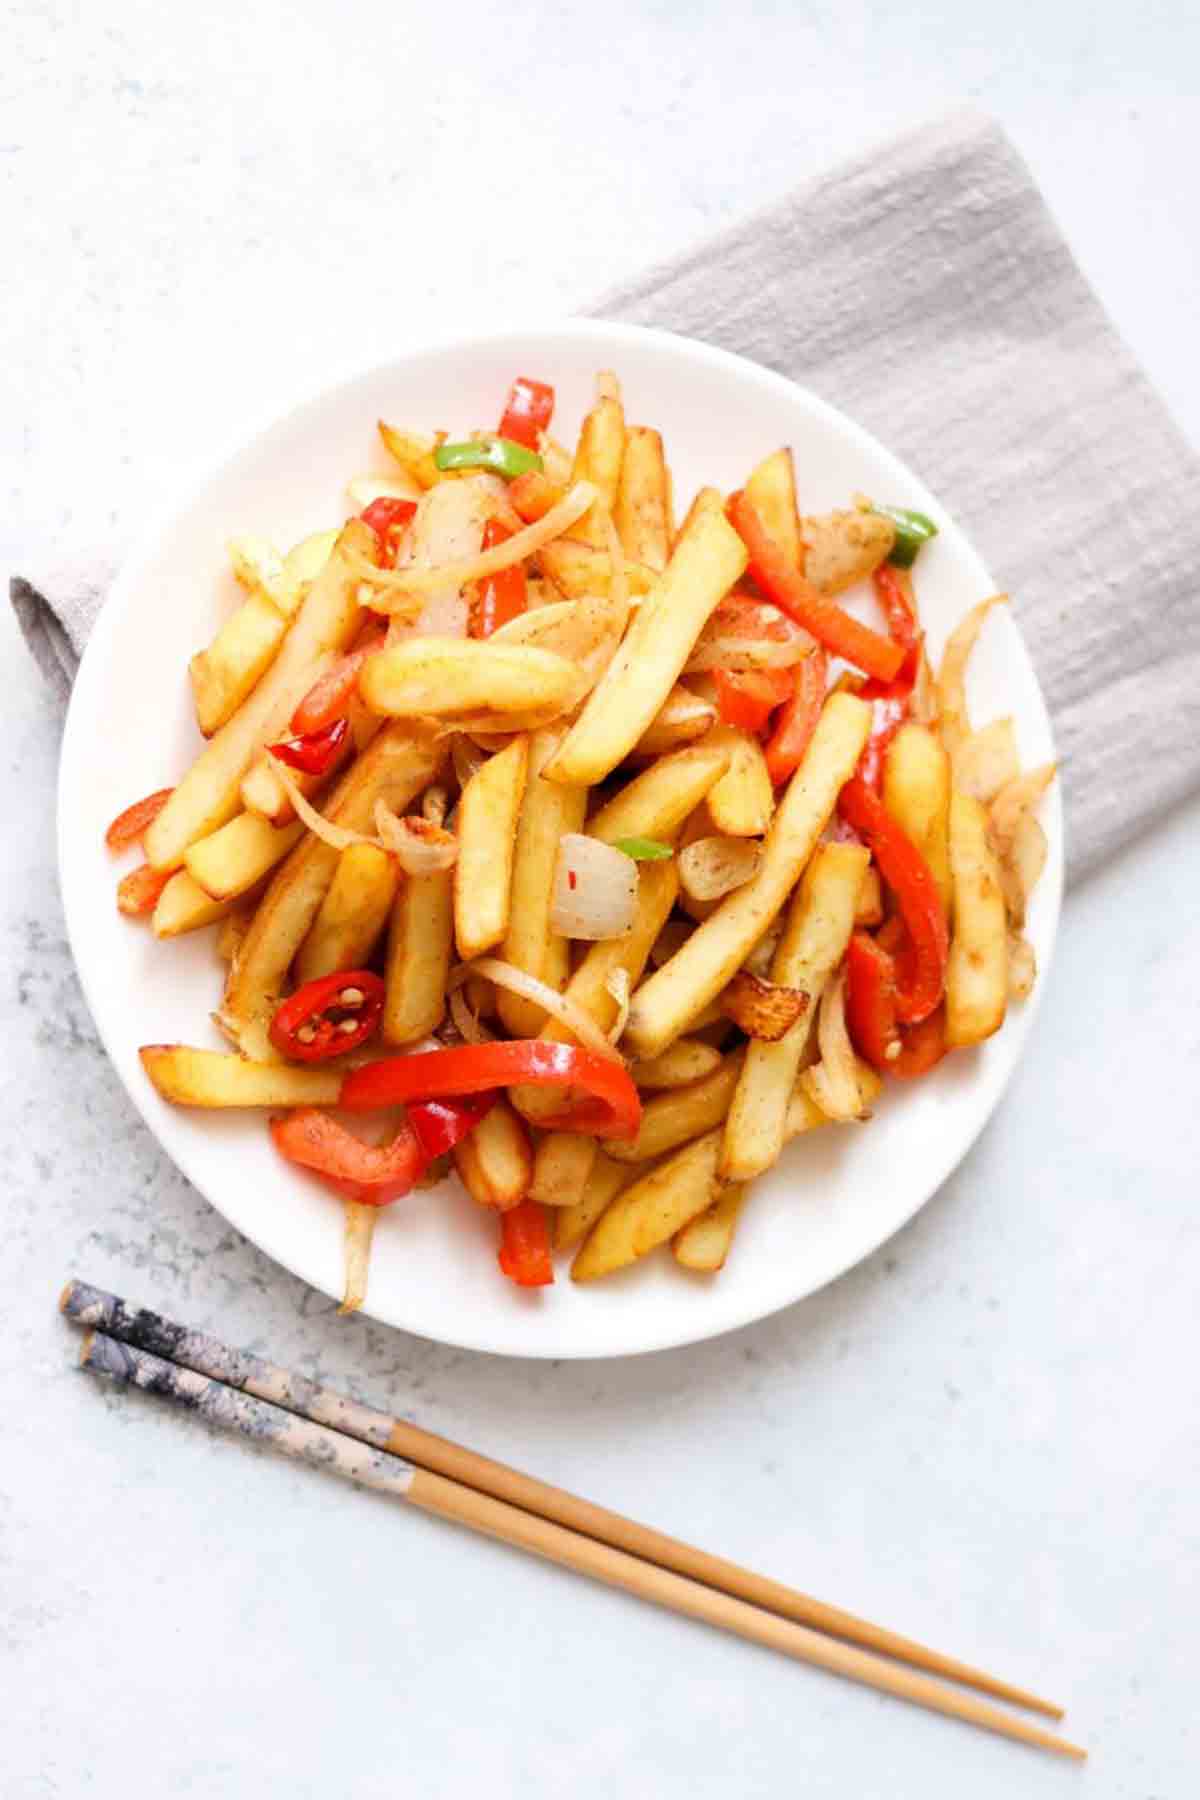 Chips With Chinese Salt And Pepper Seasoning